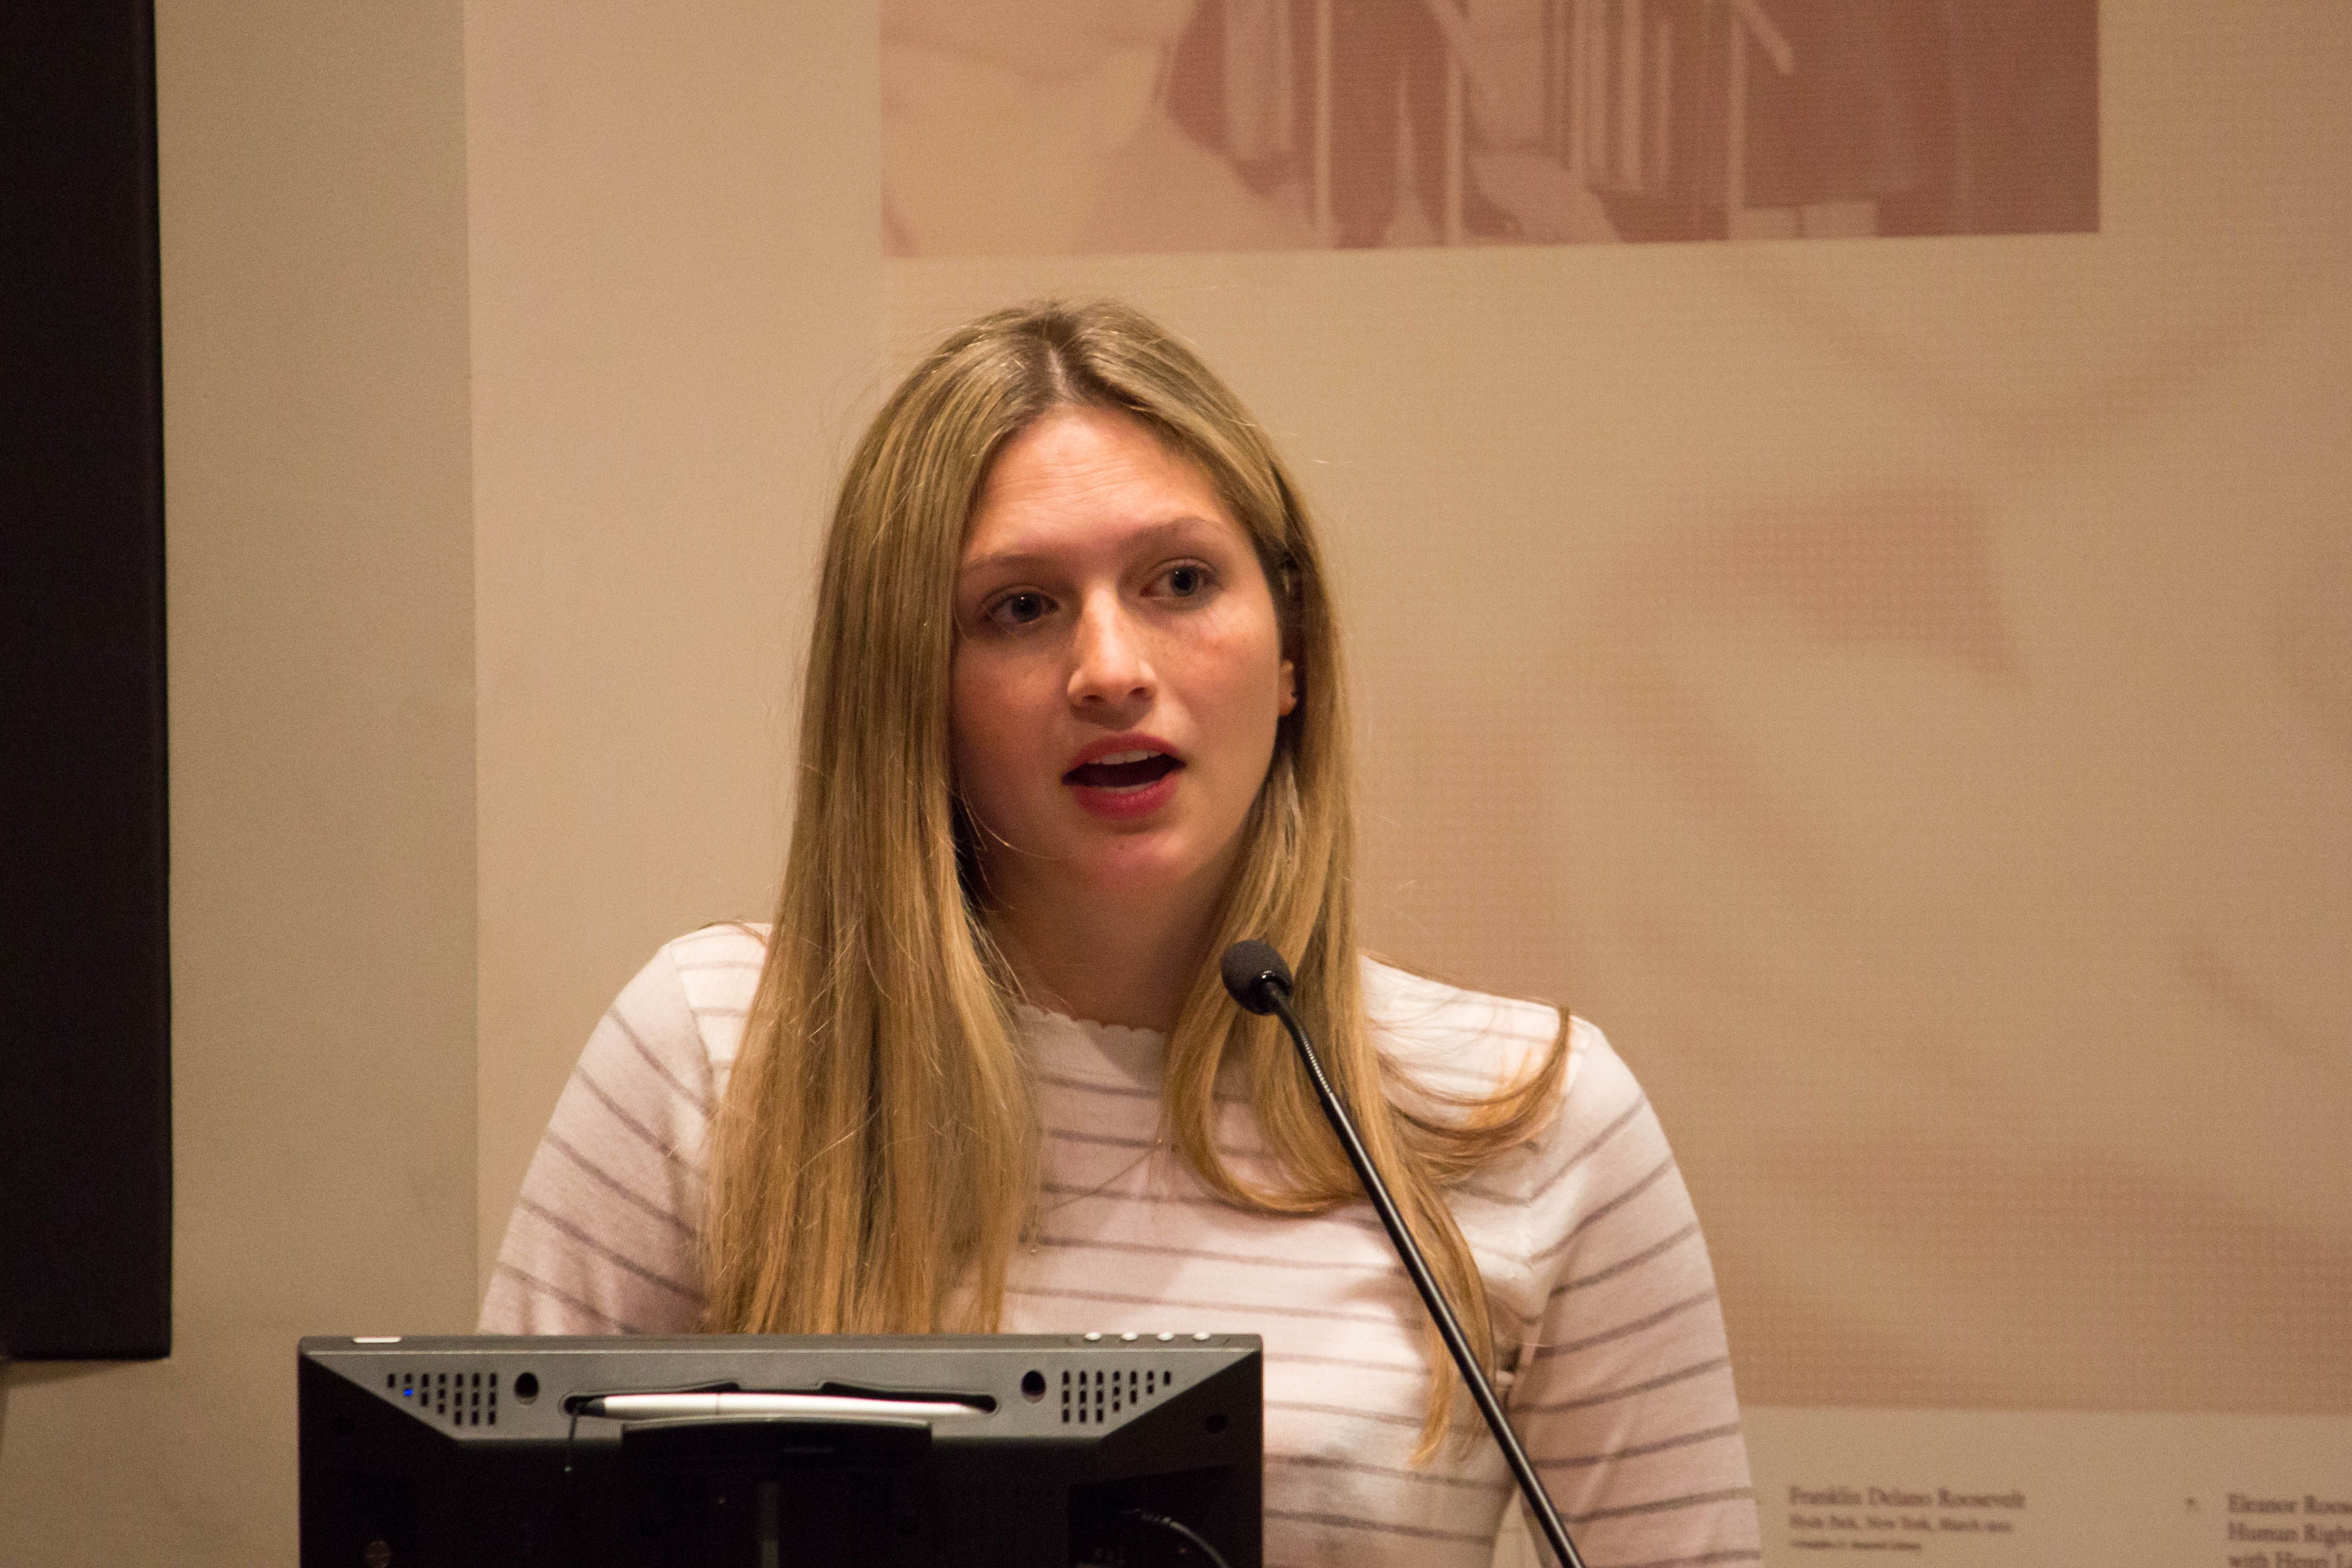 Emily Kassie illuminates the impact of migration on the global economy and areas of refugee exploitation at Roosevelt House in New York. Image by Lauren Shepherd. United States, 2017.